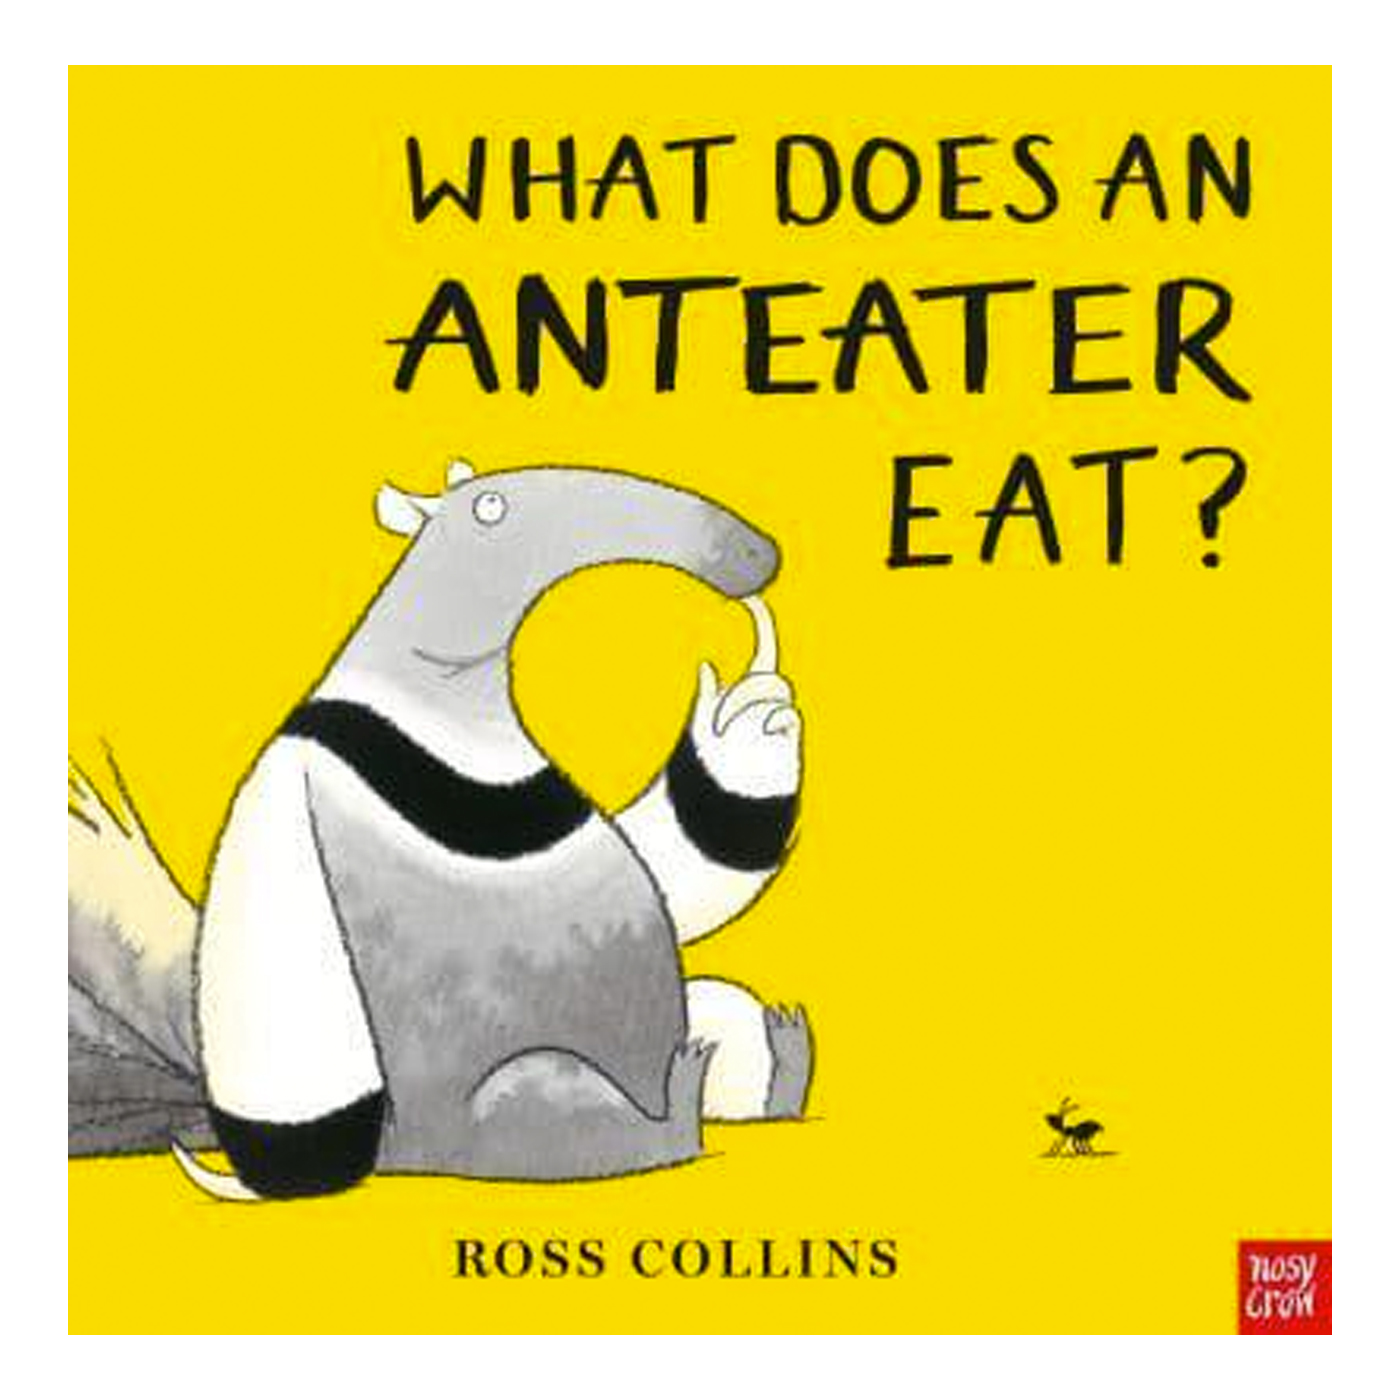  What Does An Anteater Eat?